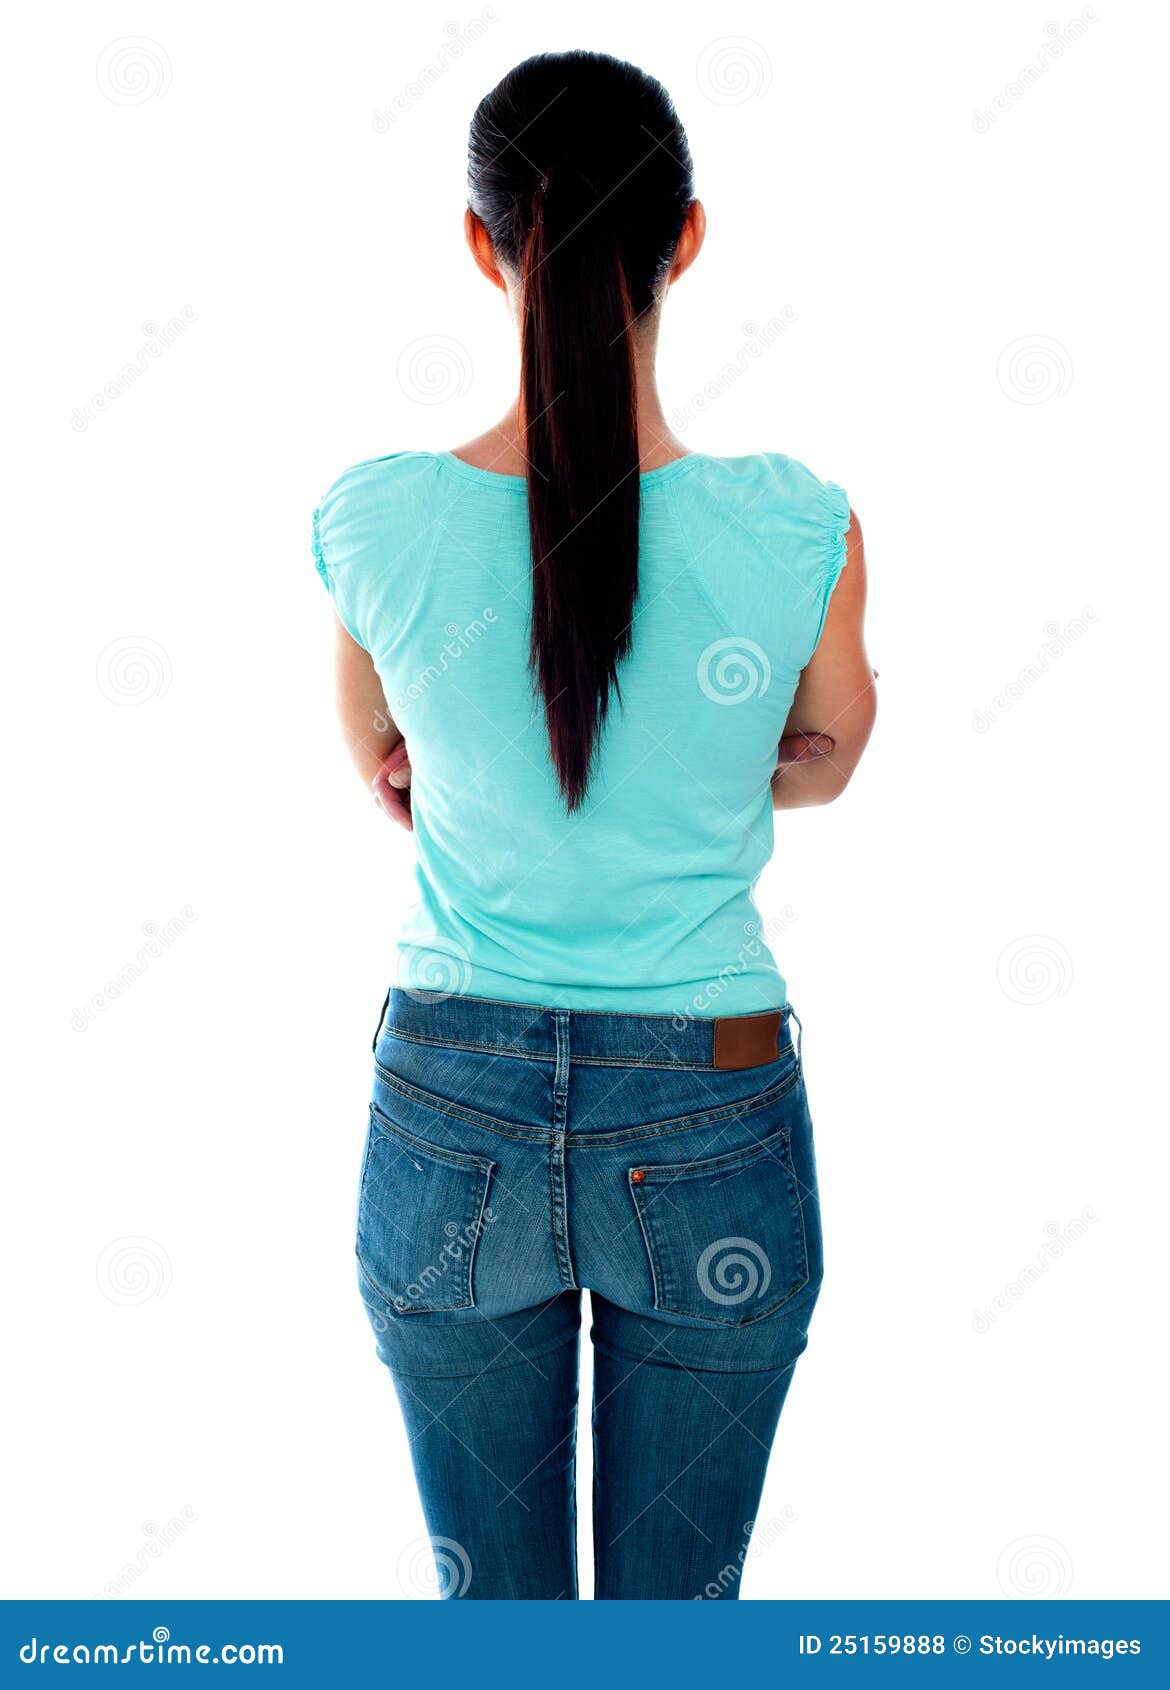 Rear View of the Back of a Shapely Young Woman Stock Image - Image